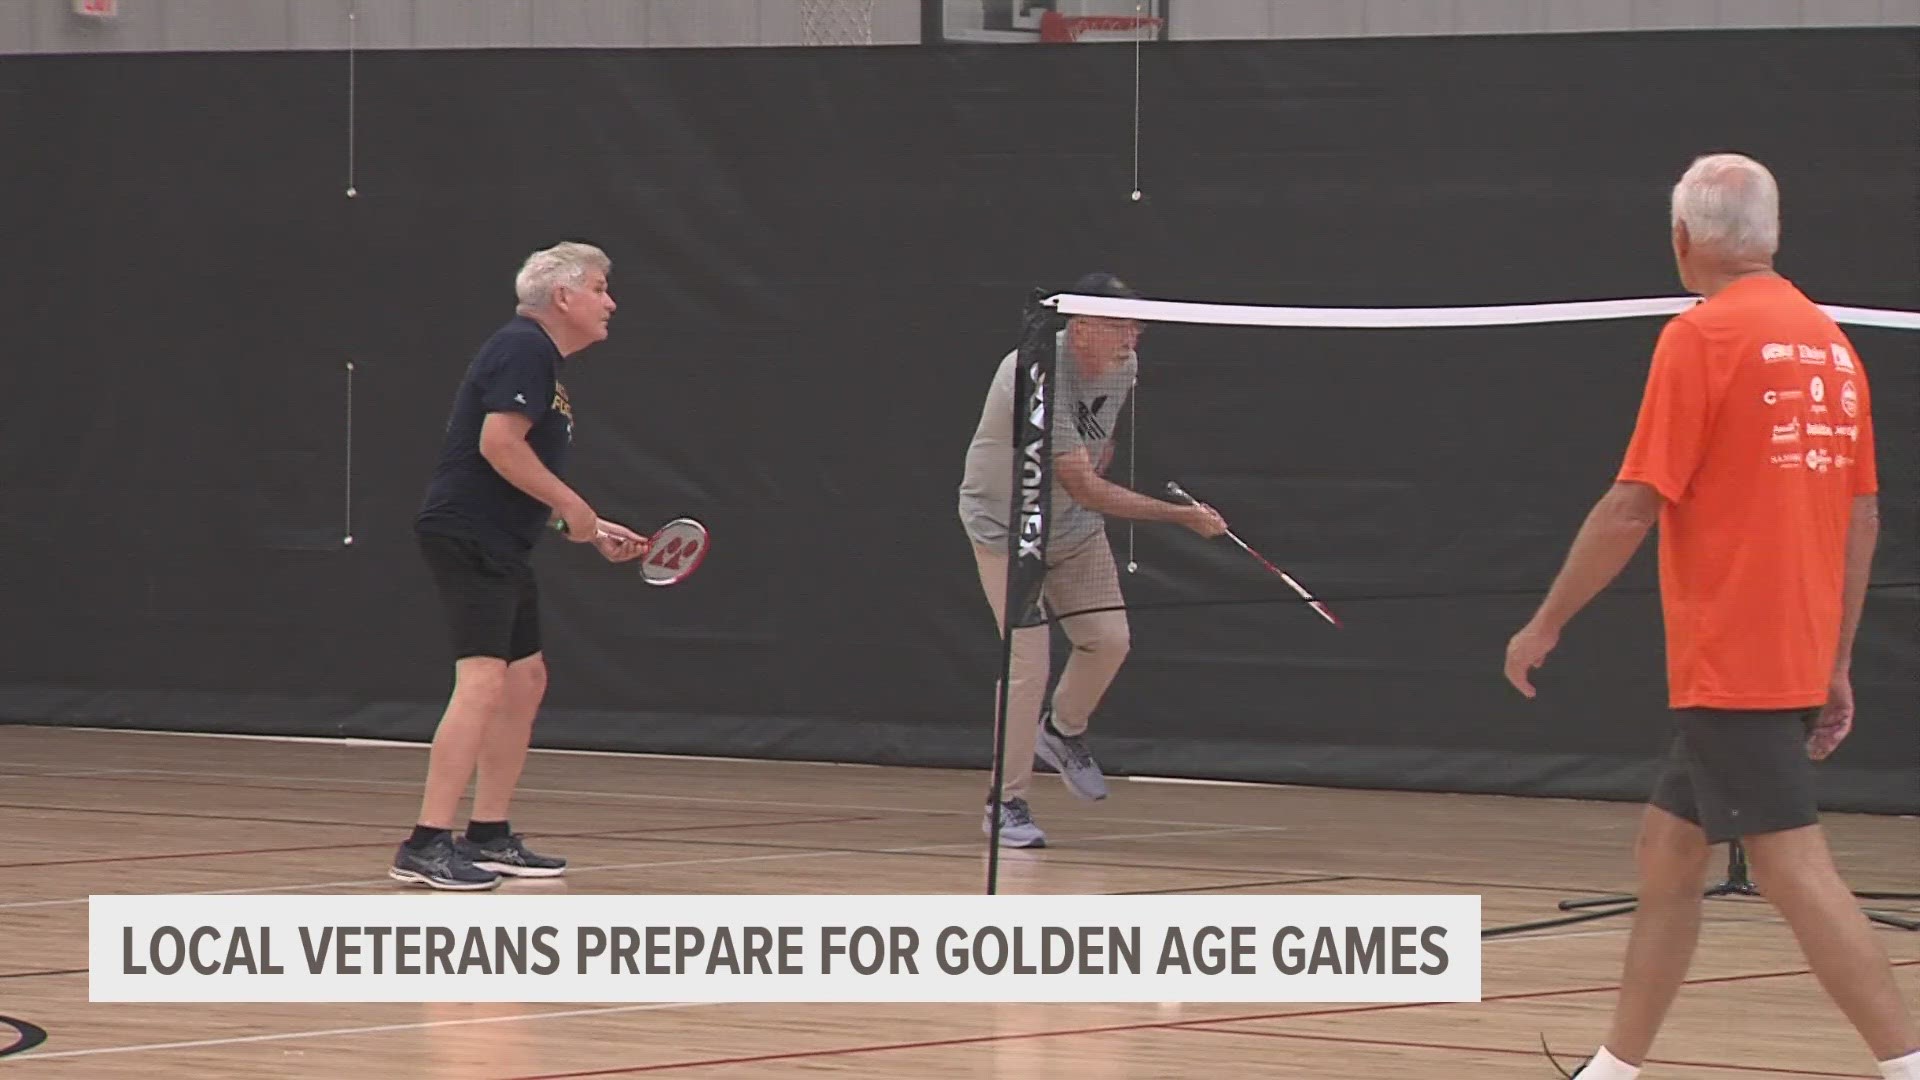 The 37th Annual National Veterans Golden Age Games will take place in central Iowa May 20-25.